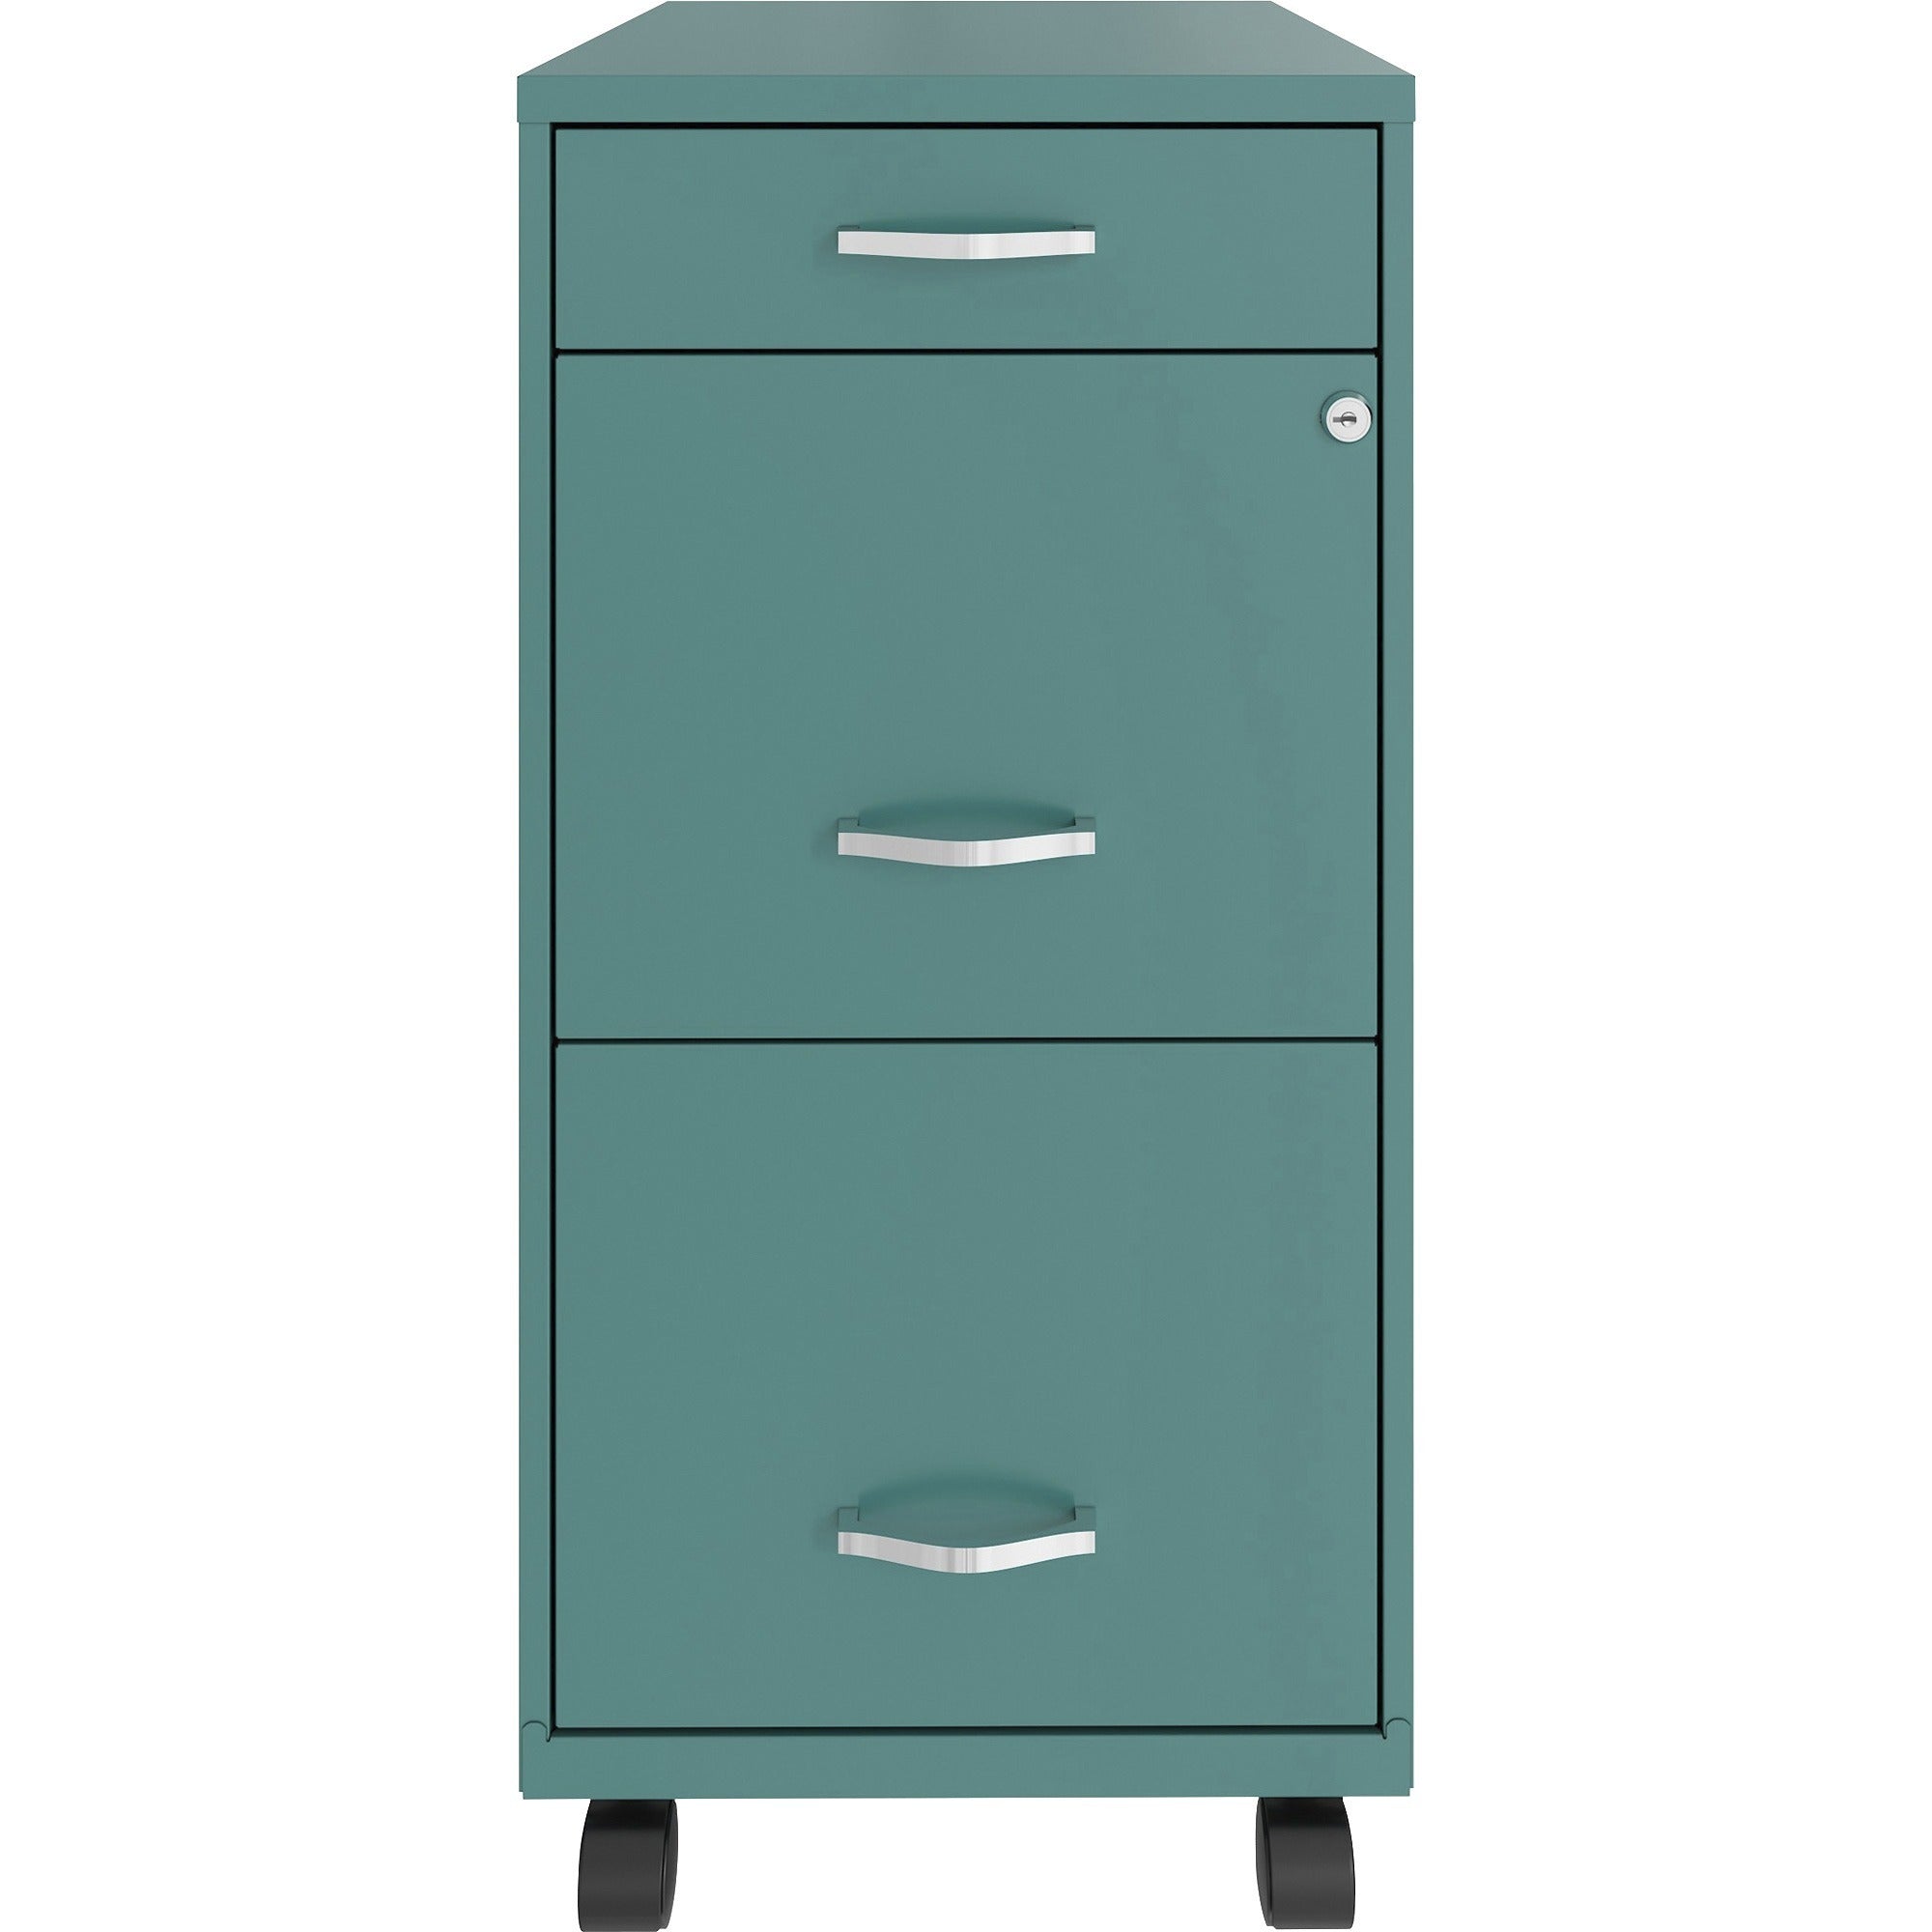 nusparc-mobile-file-cabinet-142-x-18-x-295-3-x-drawers-for-file-box-letter-mobility-locking-drawer-glide-suspension-3-4-drawer-extension-cam-lock-nonporous-surface-teal-painted-steel-recycled_nprvf318bmtl - 2